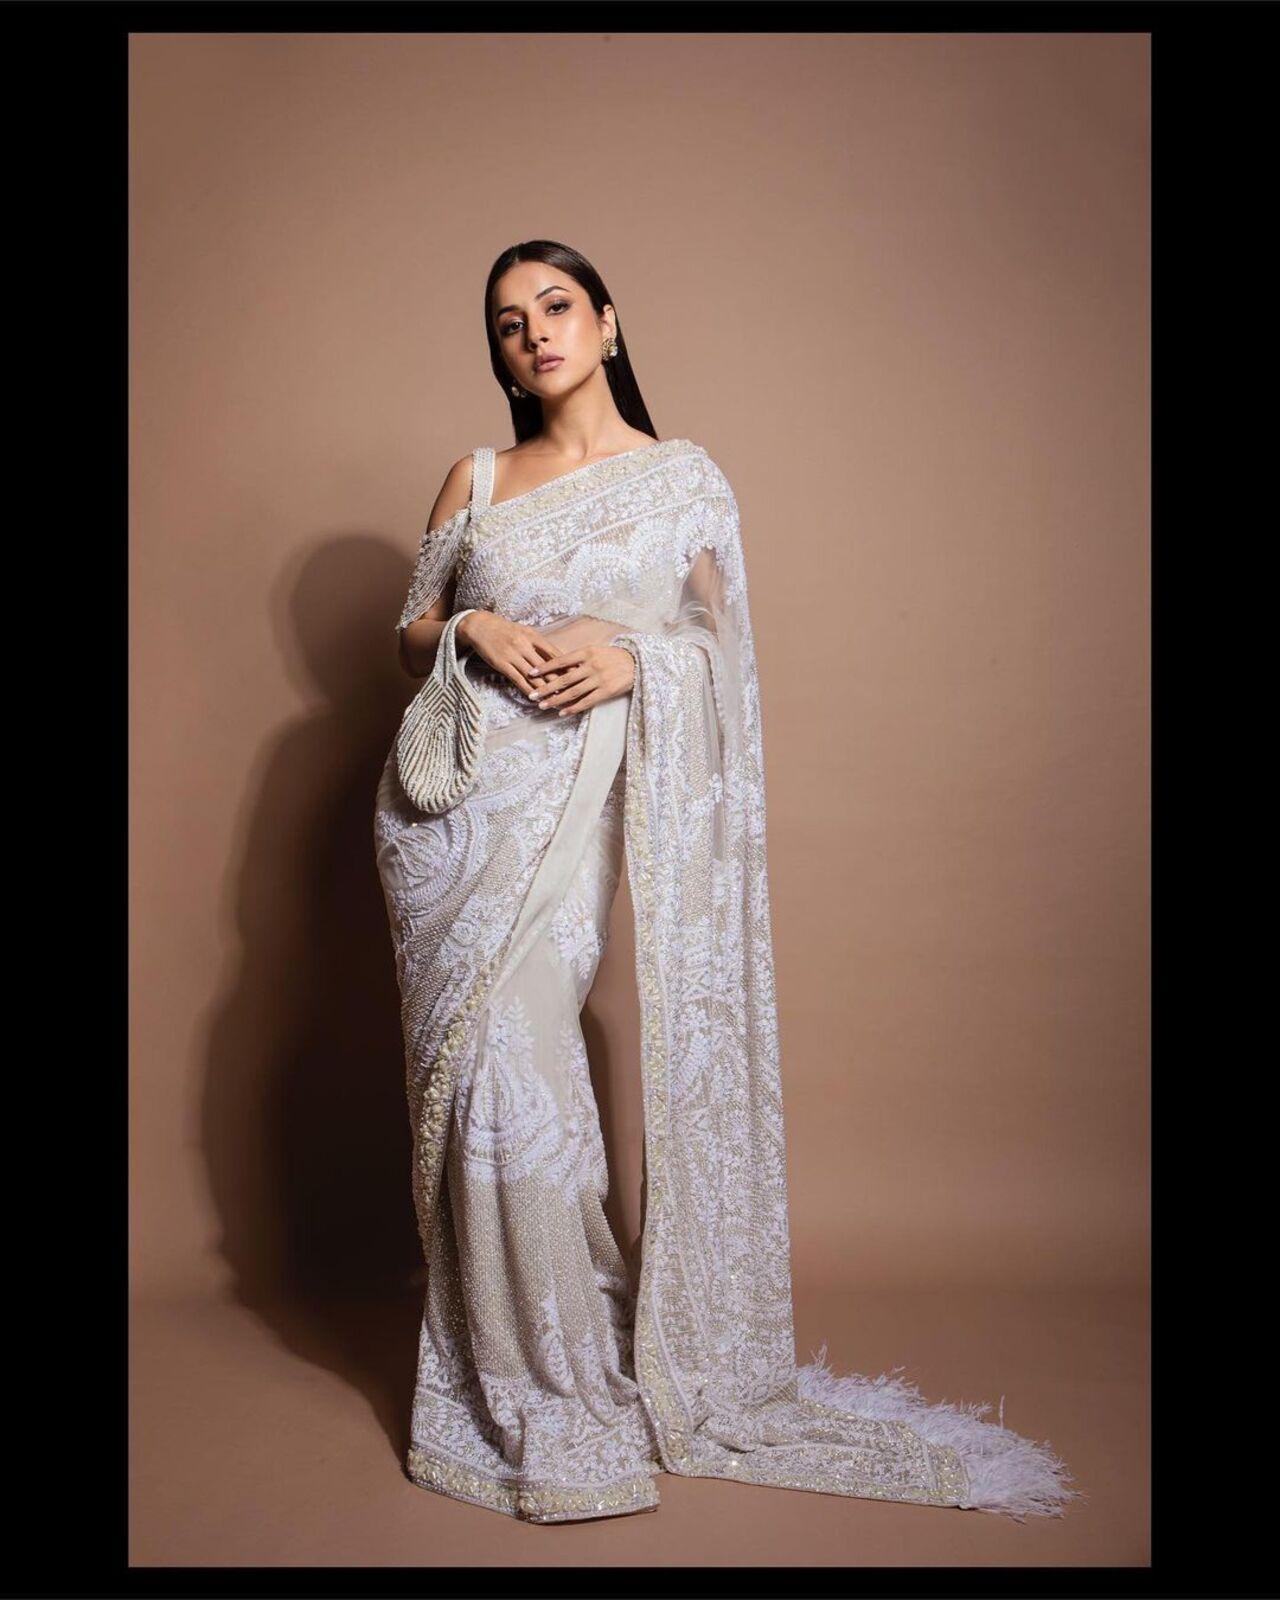 Shehnaaz looked in a white lacy saree. The actress added oomph to a classic outfit with a gorgeous blouse. Her look can be easily recreated for the first day of Navratri as white is traditionally worn